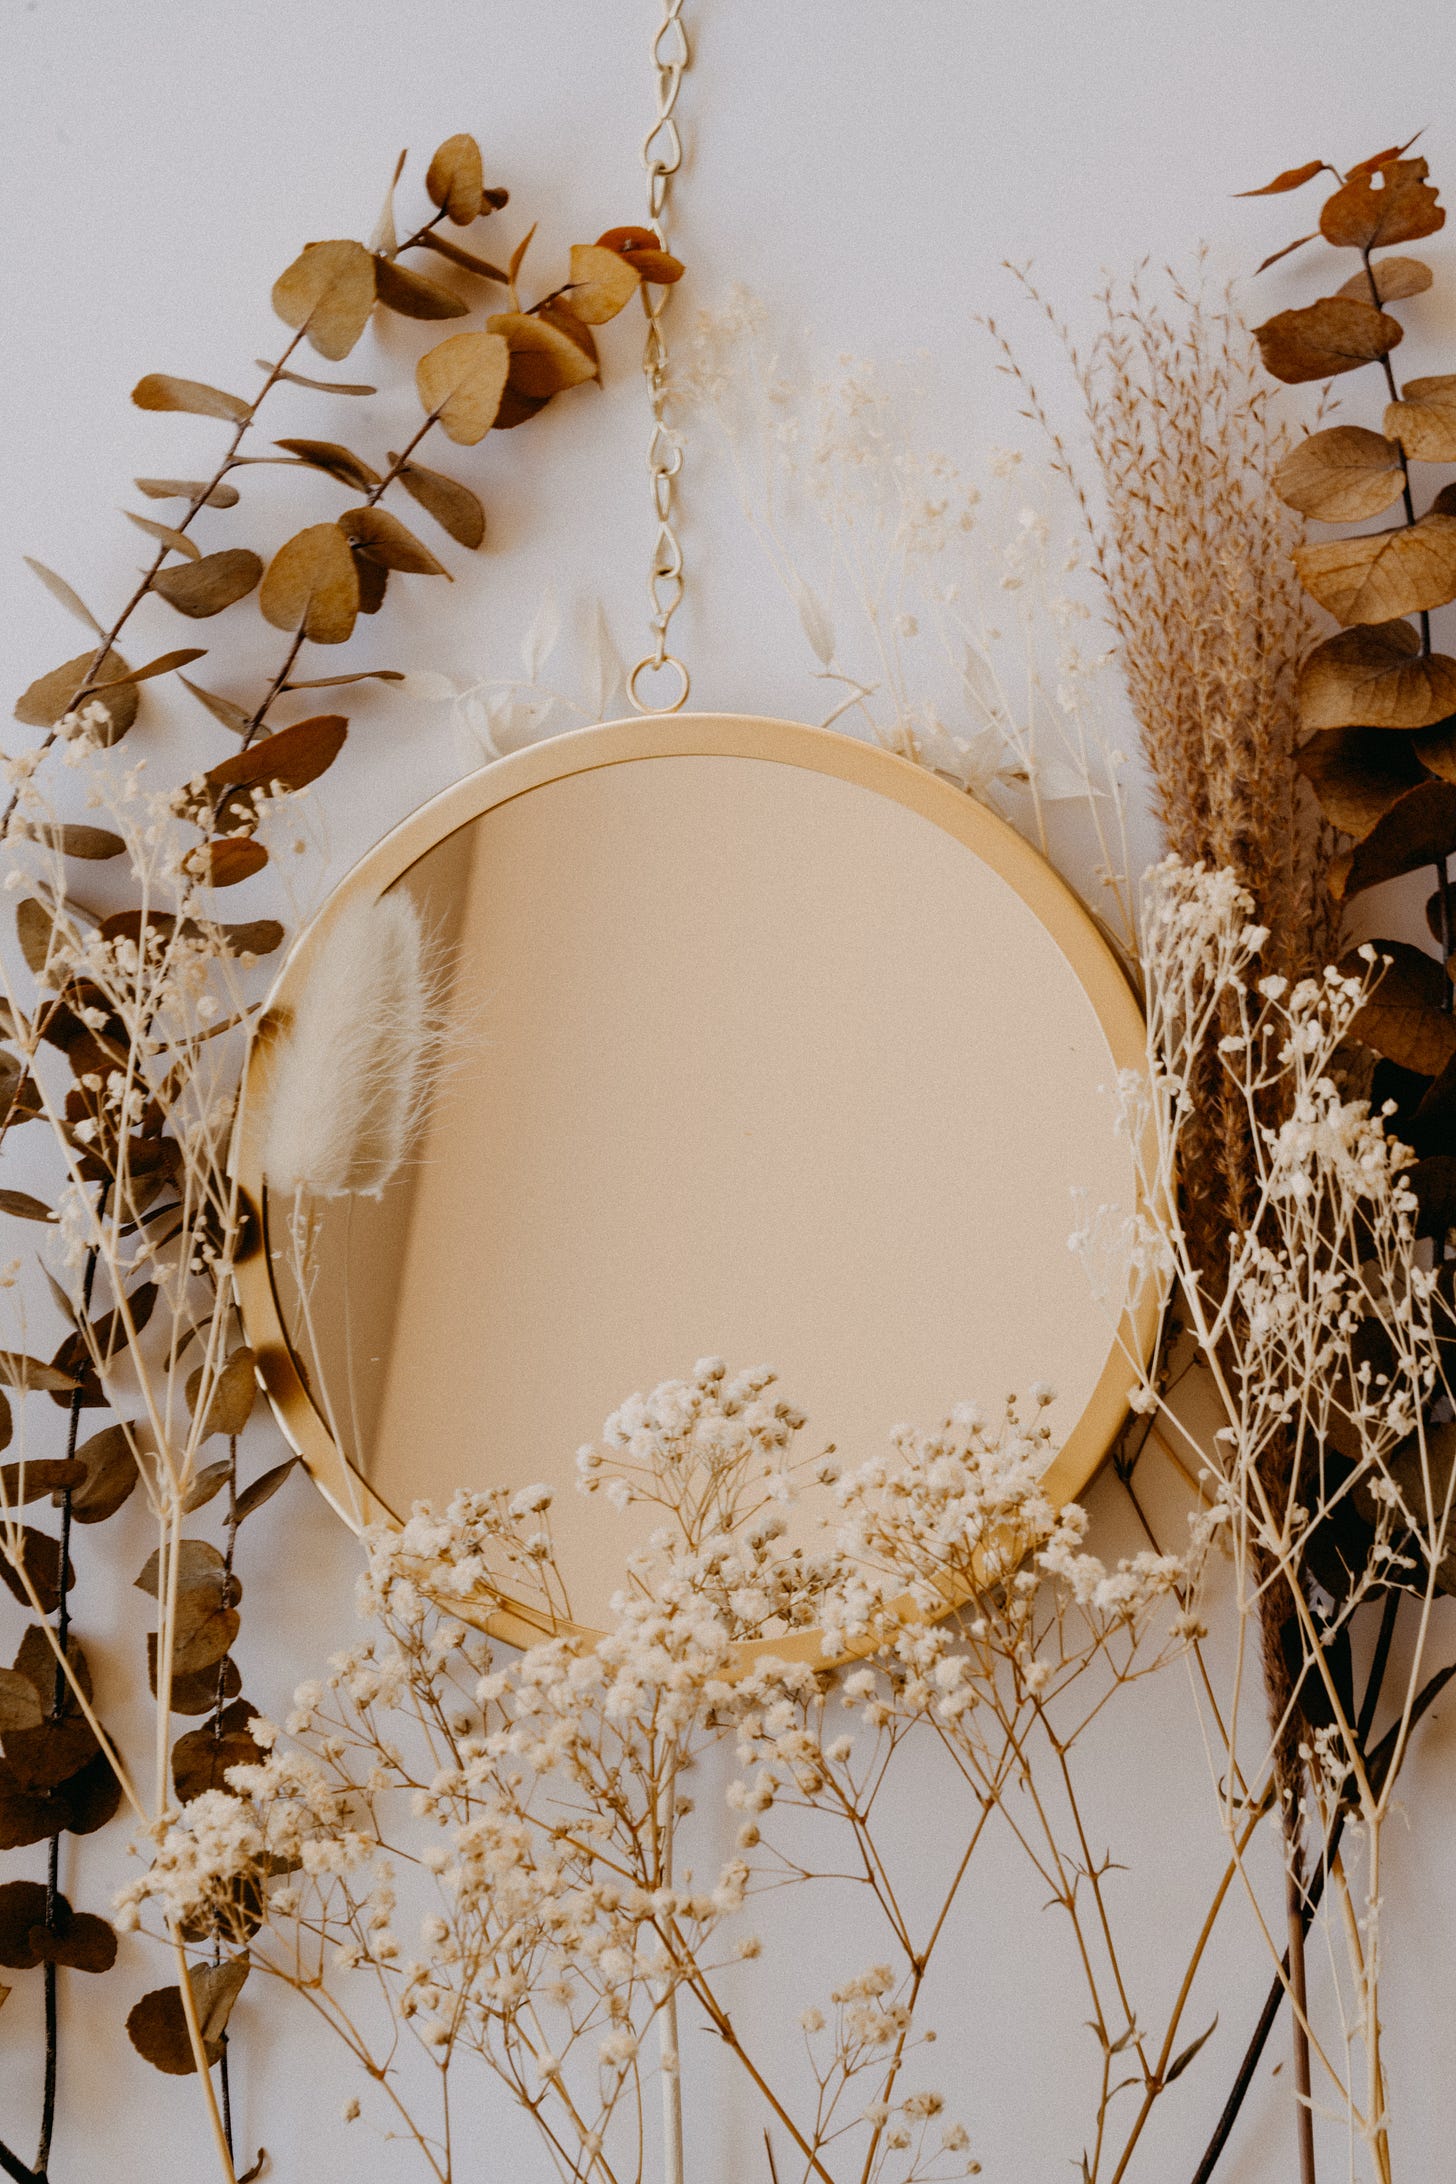 Rustic gold mirror with dried plants around it. Reflection